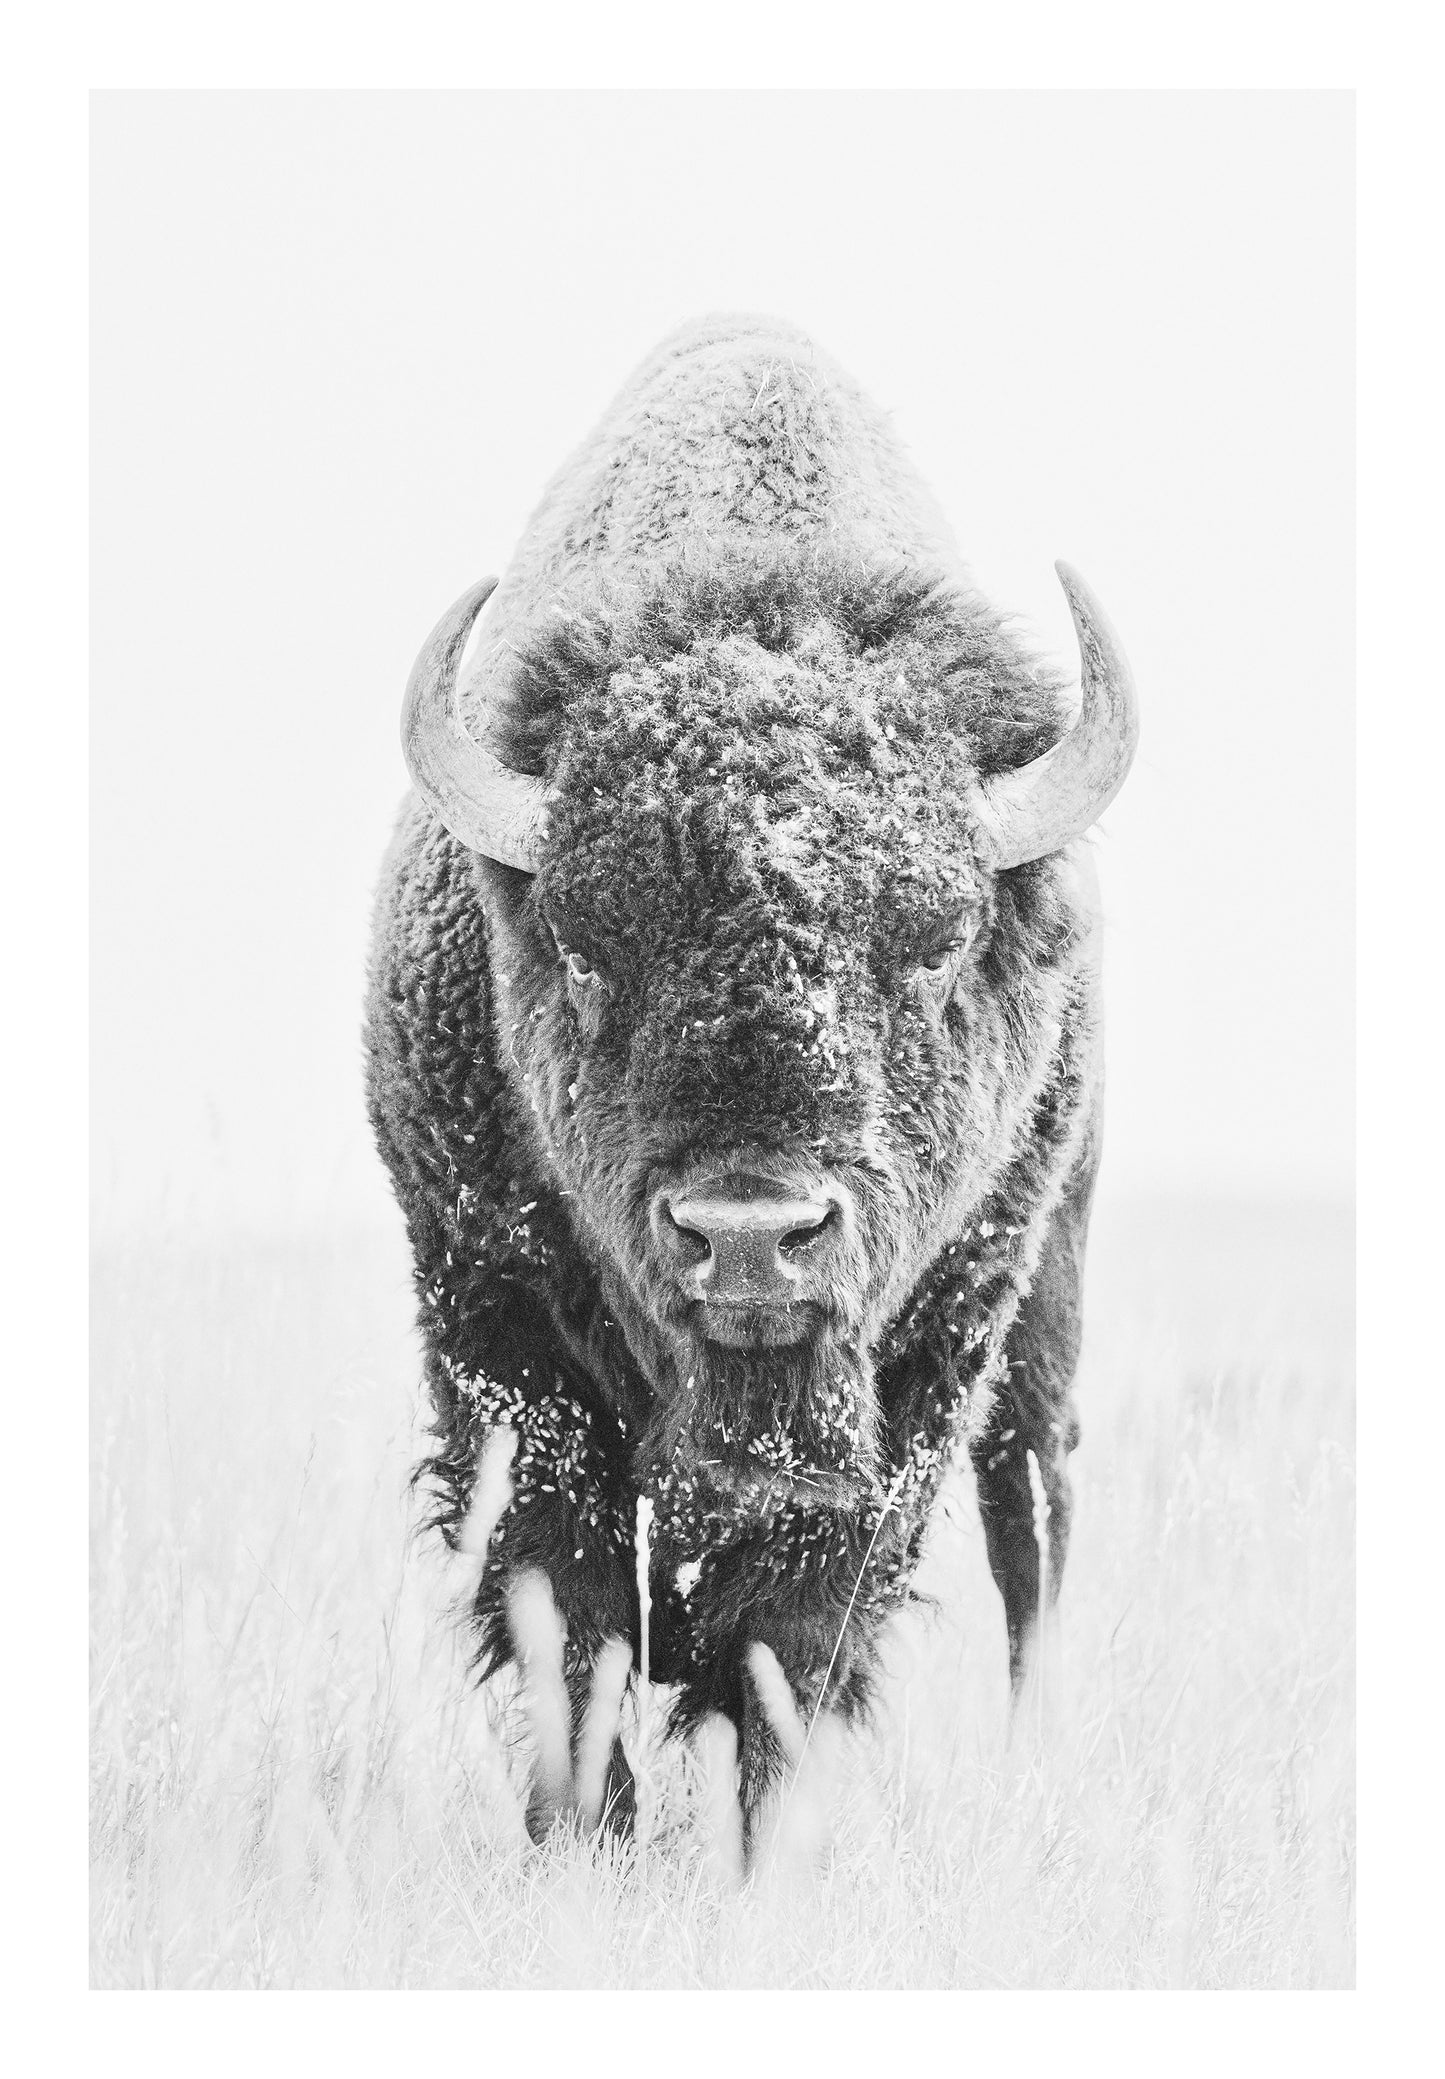 "Tatanka" limited edition black and white bison photograph.